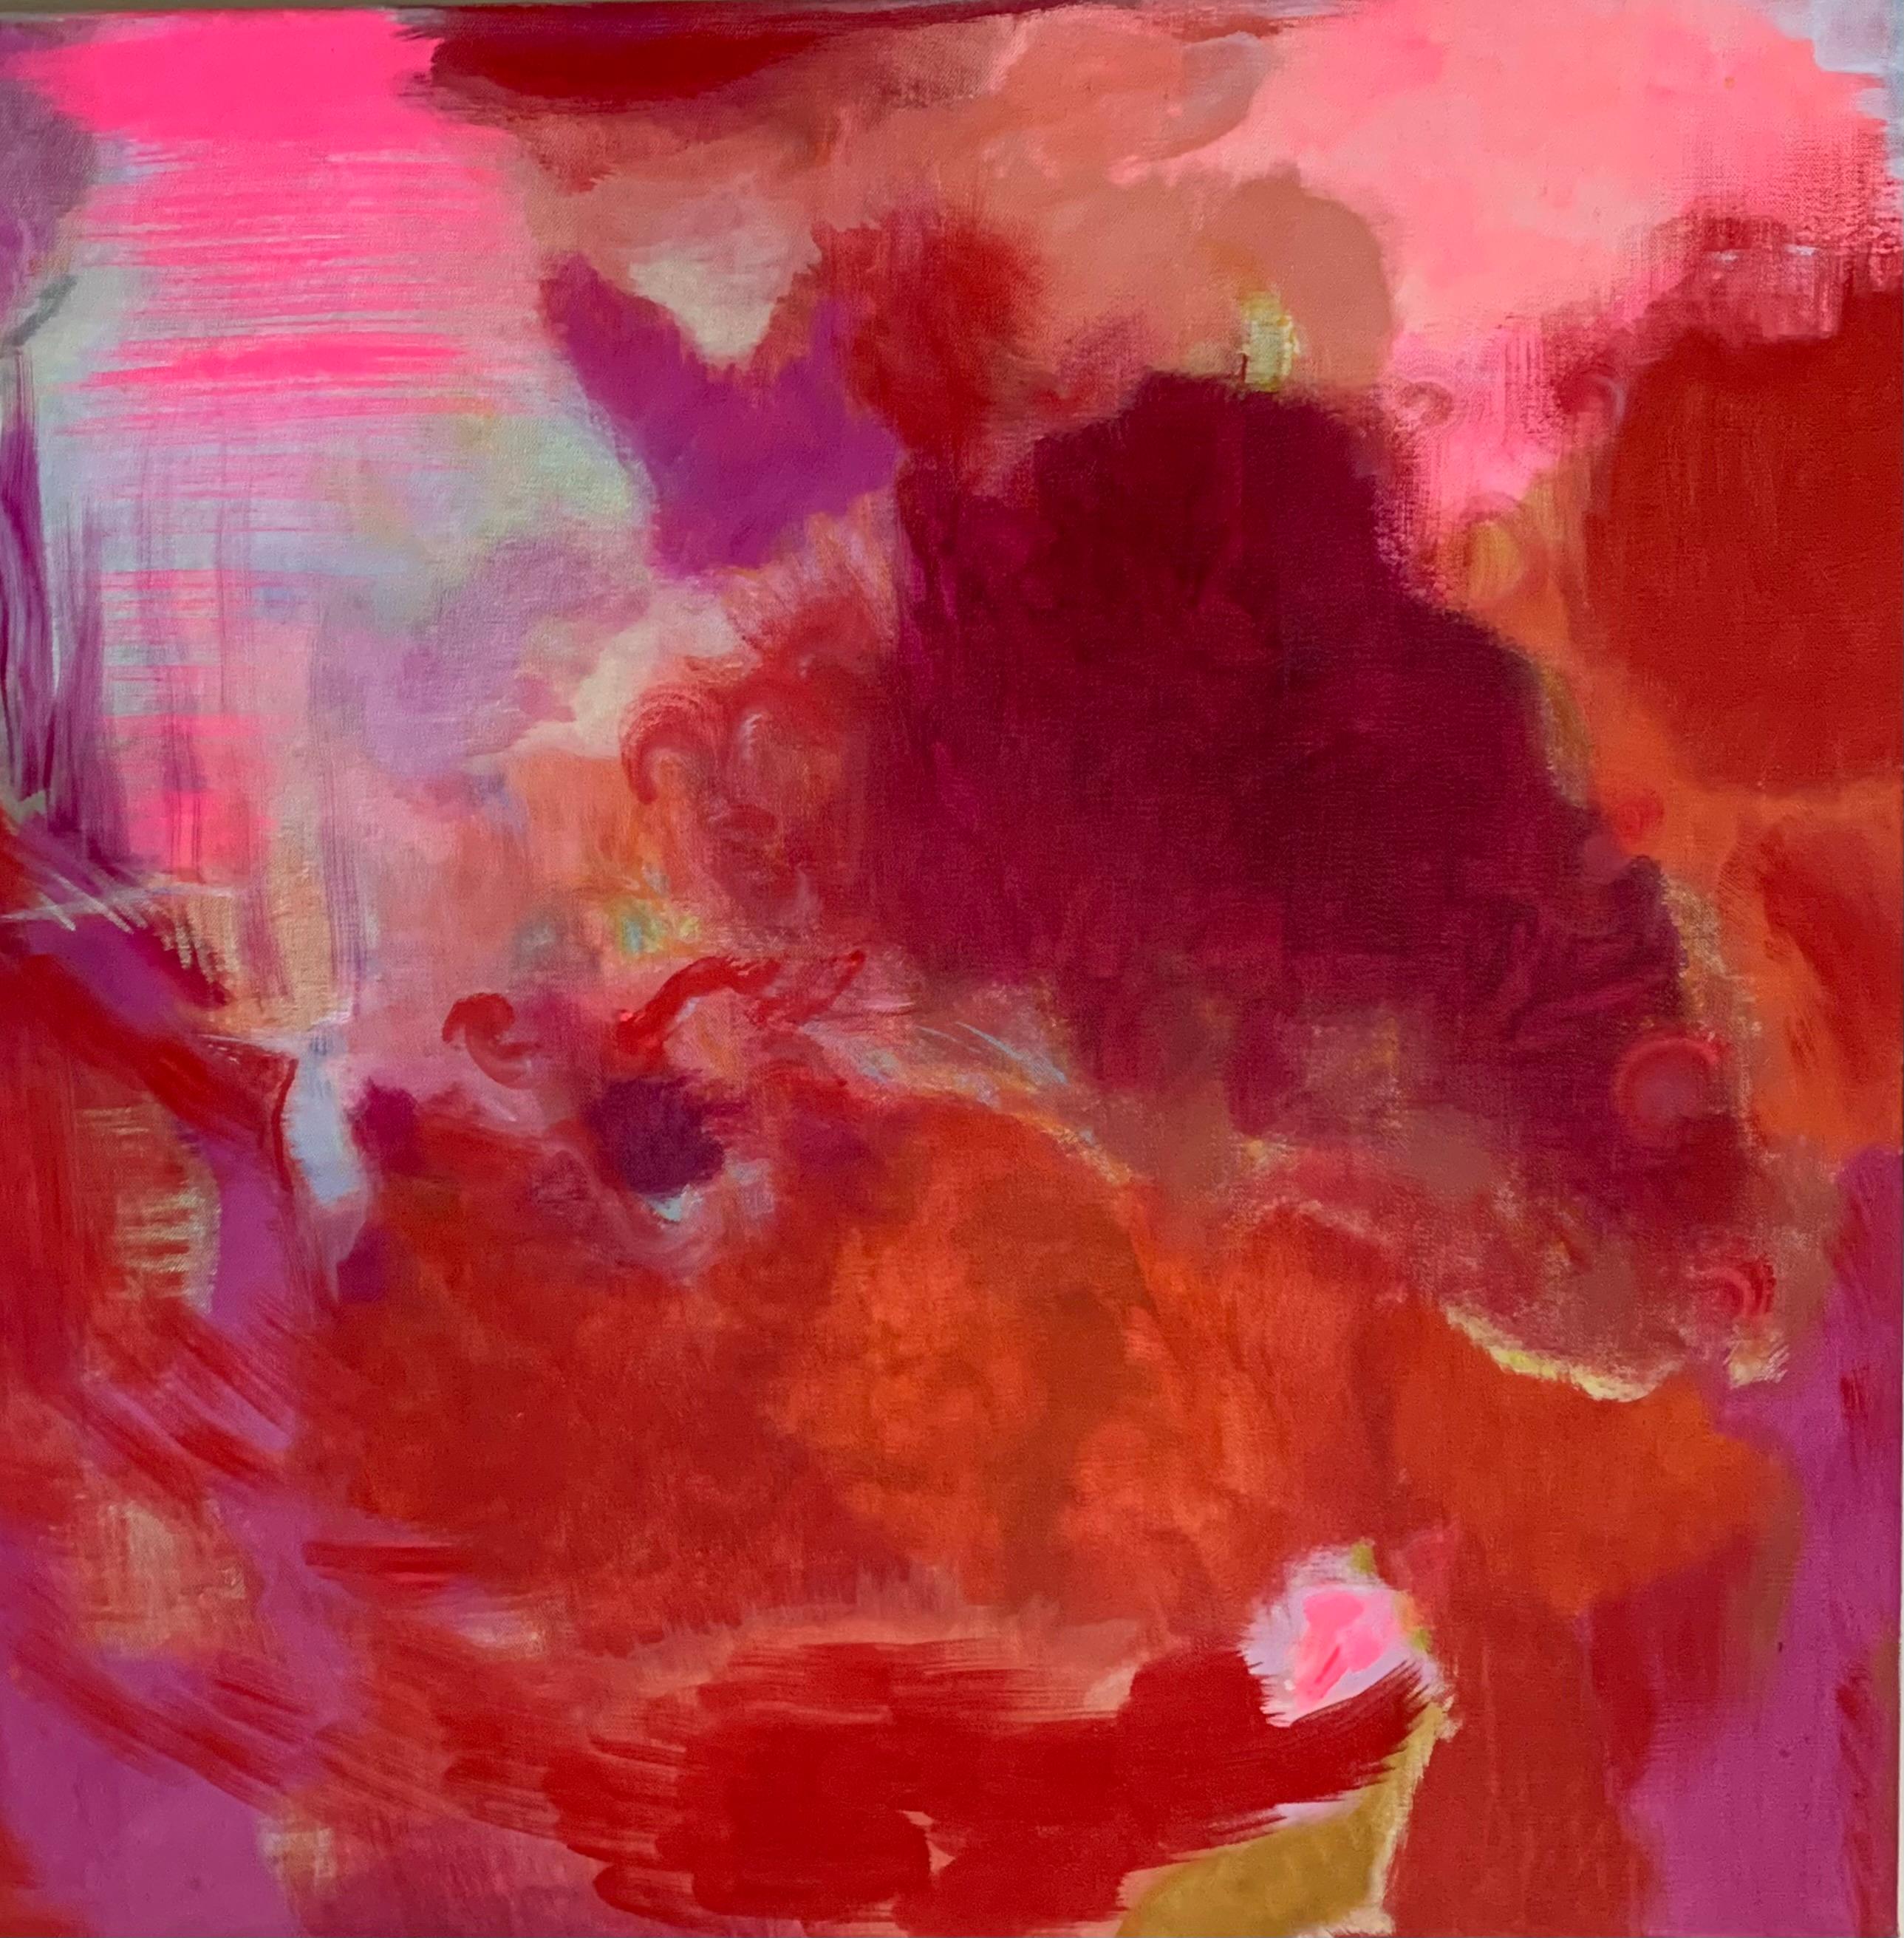 Peggy Cyphers Abstract Painting - "Love Cats" Abstract Ethereal Painting in Red, Pink and Crimson tones